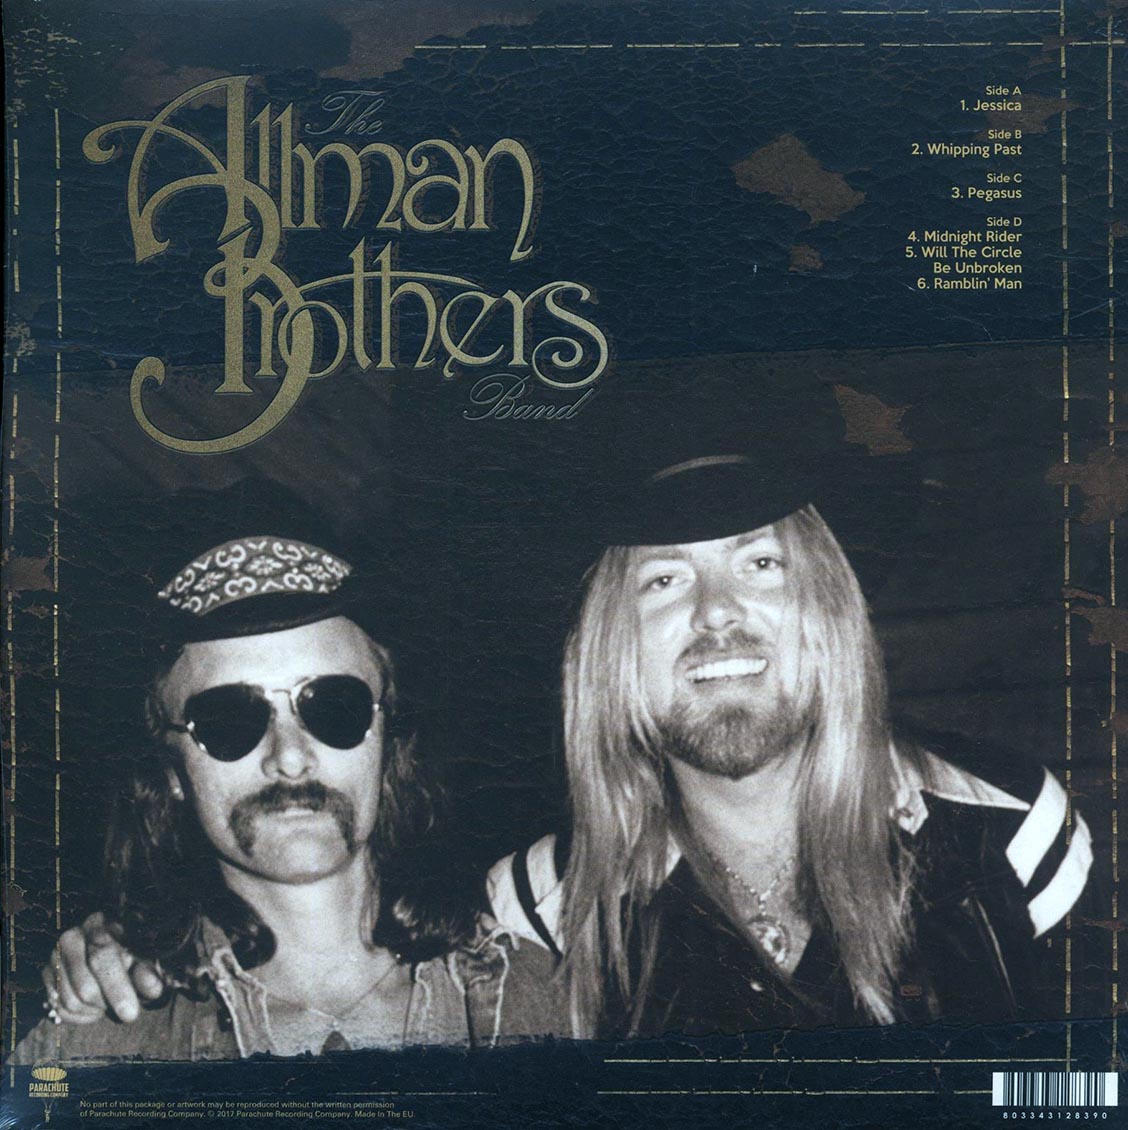 The Allman Brothers Band - Almost The Eighties Volume 2: Nassau Coliseum, Uniondale, NY December 30th, 1979